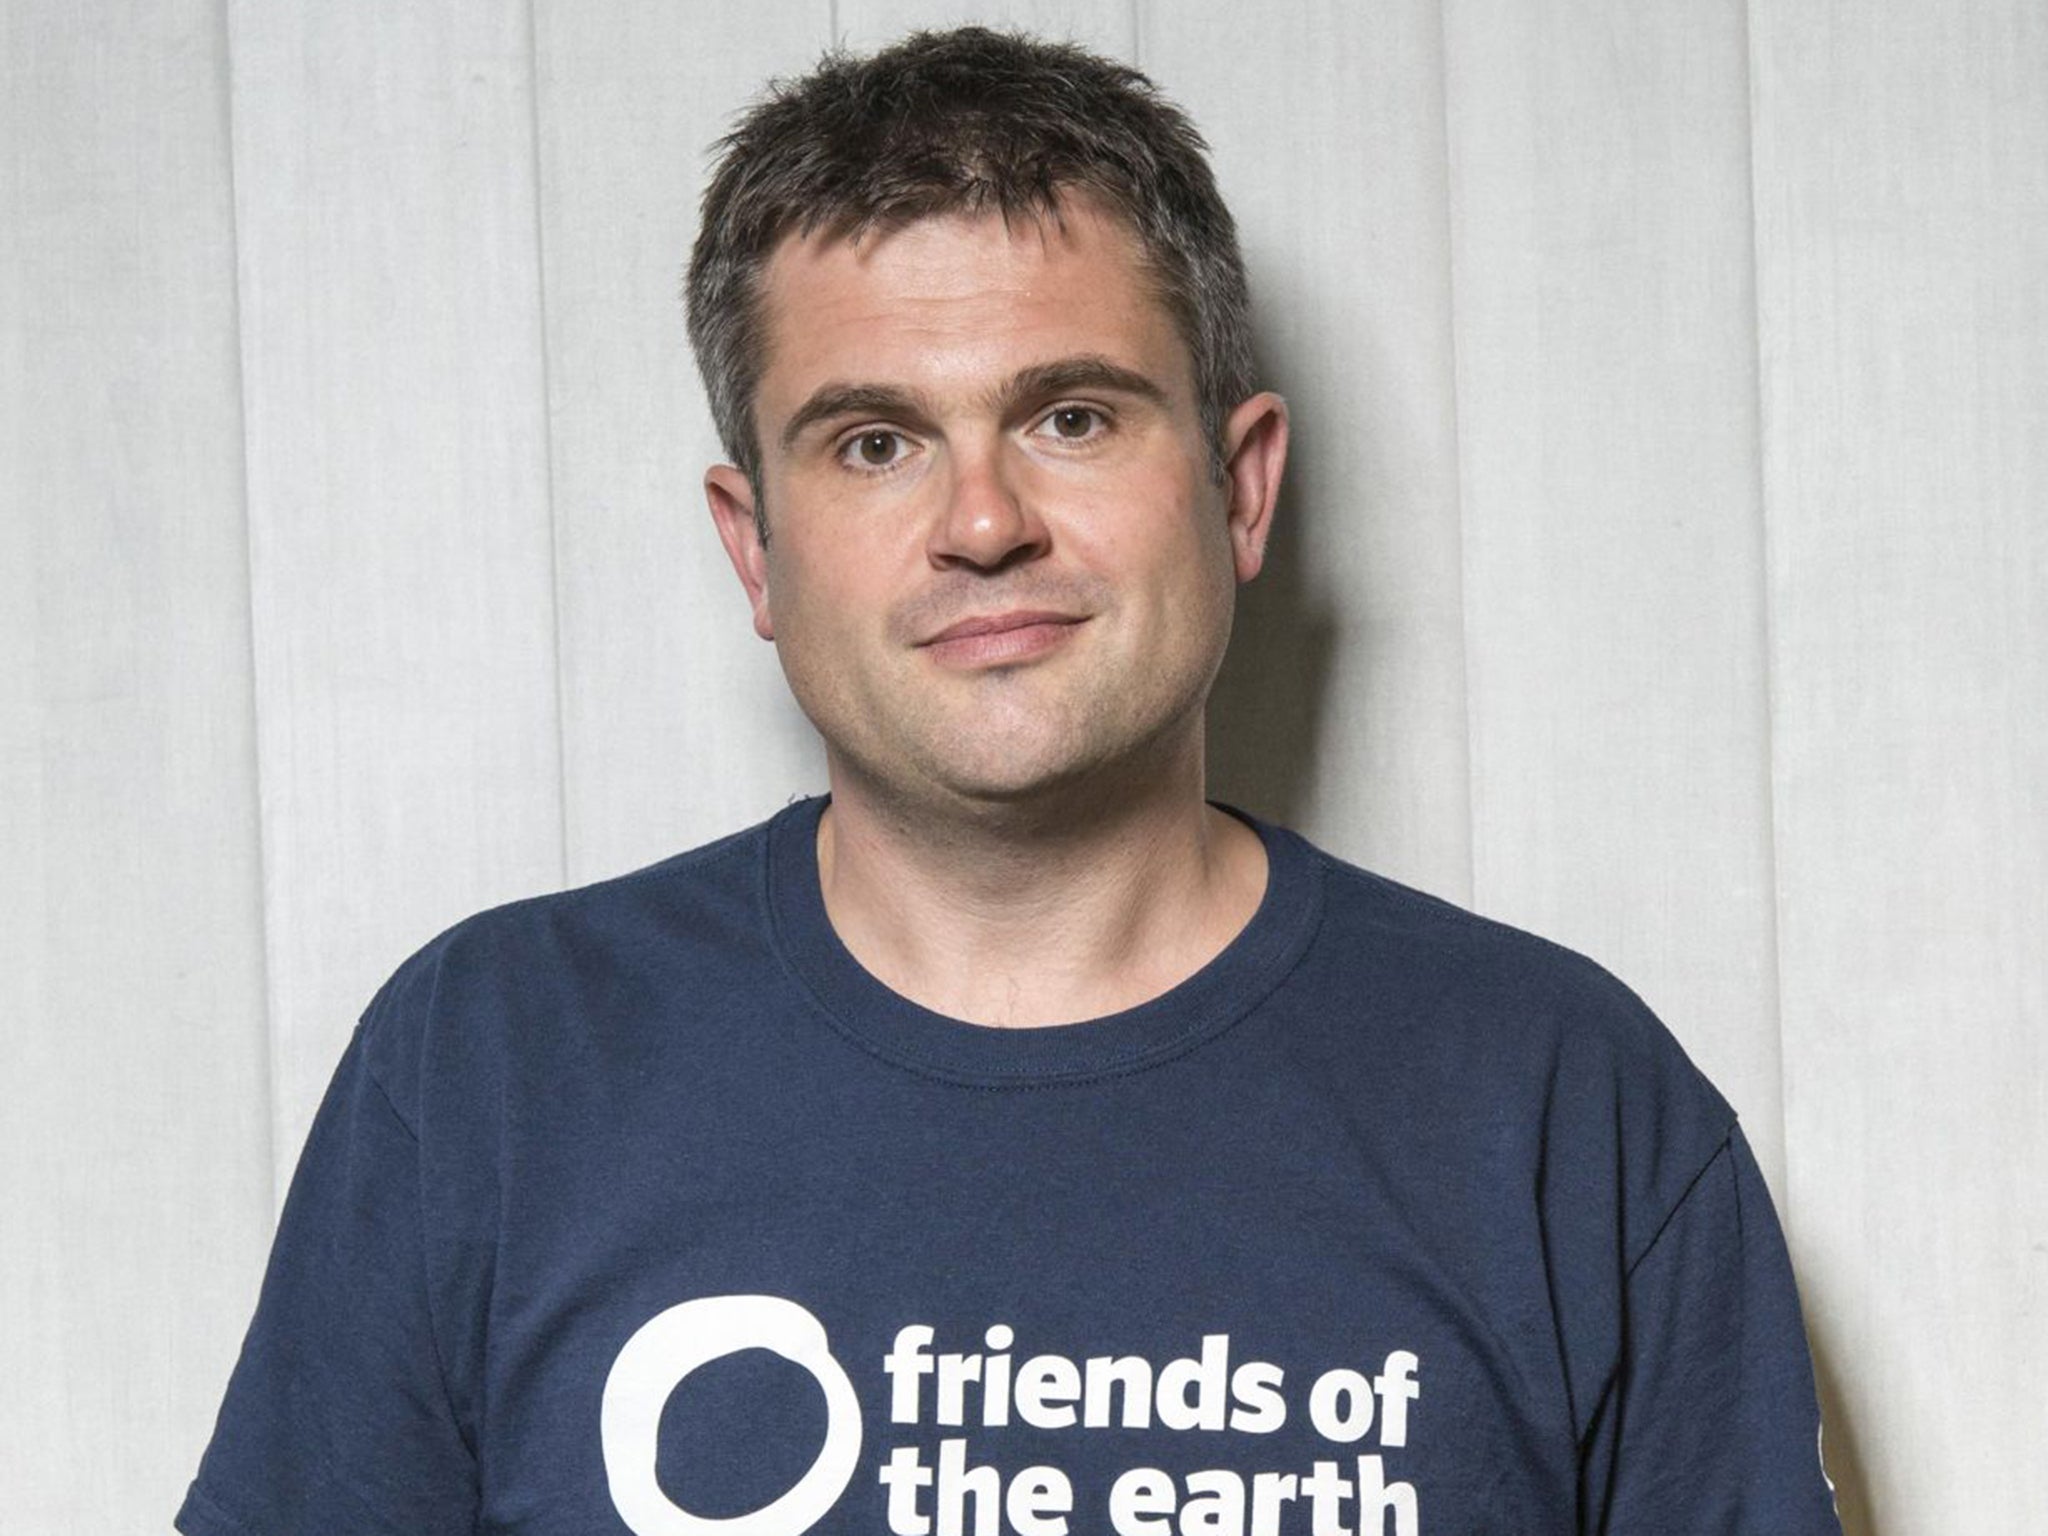 Craig Bennett, chief executive officer of Friends of the Earth